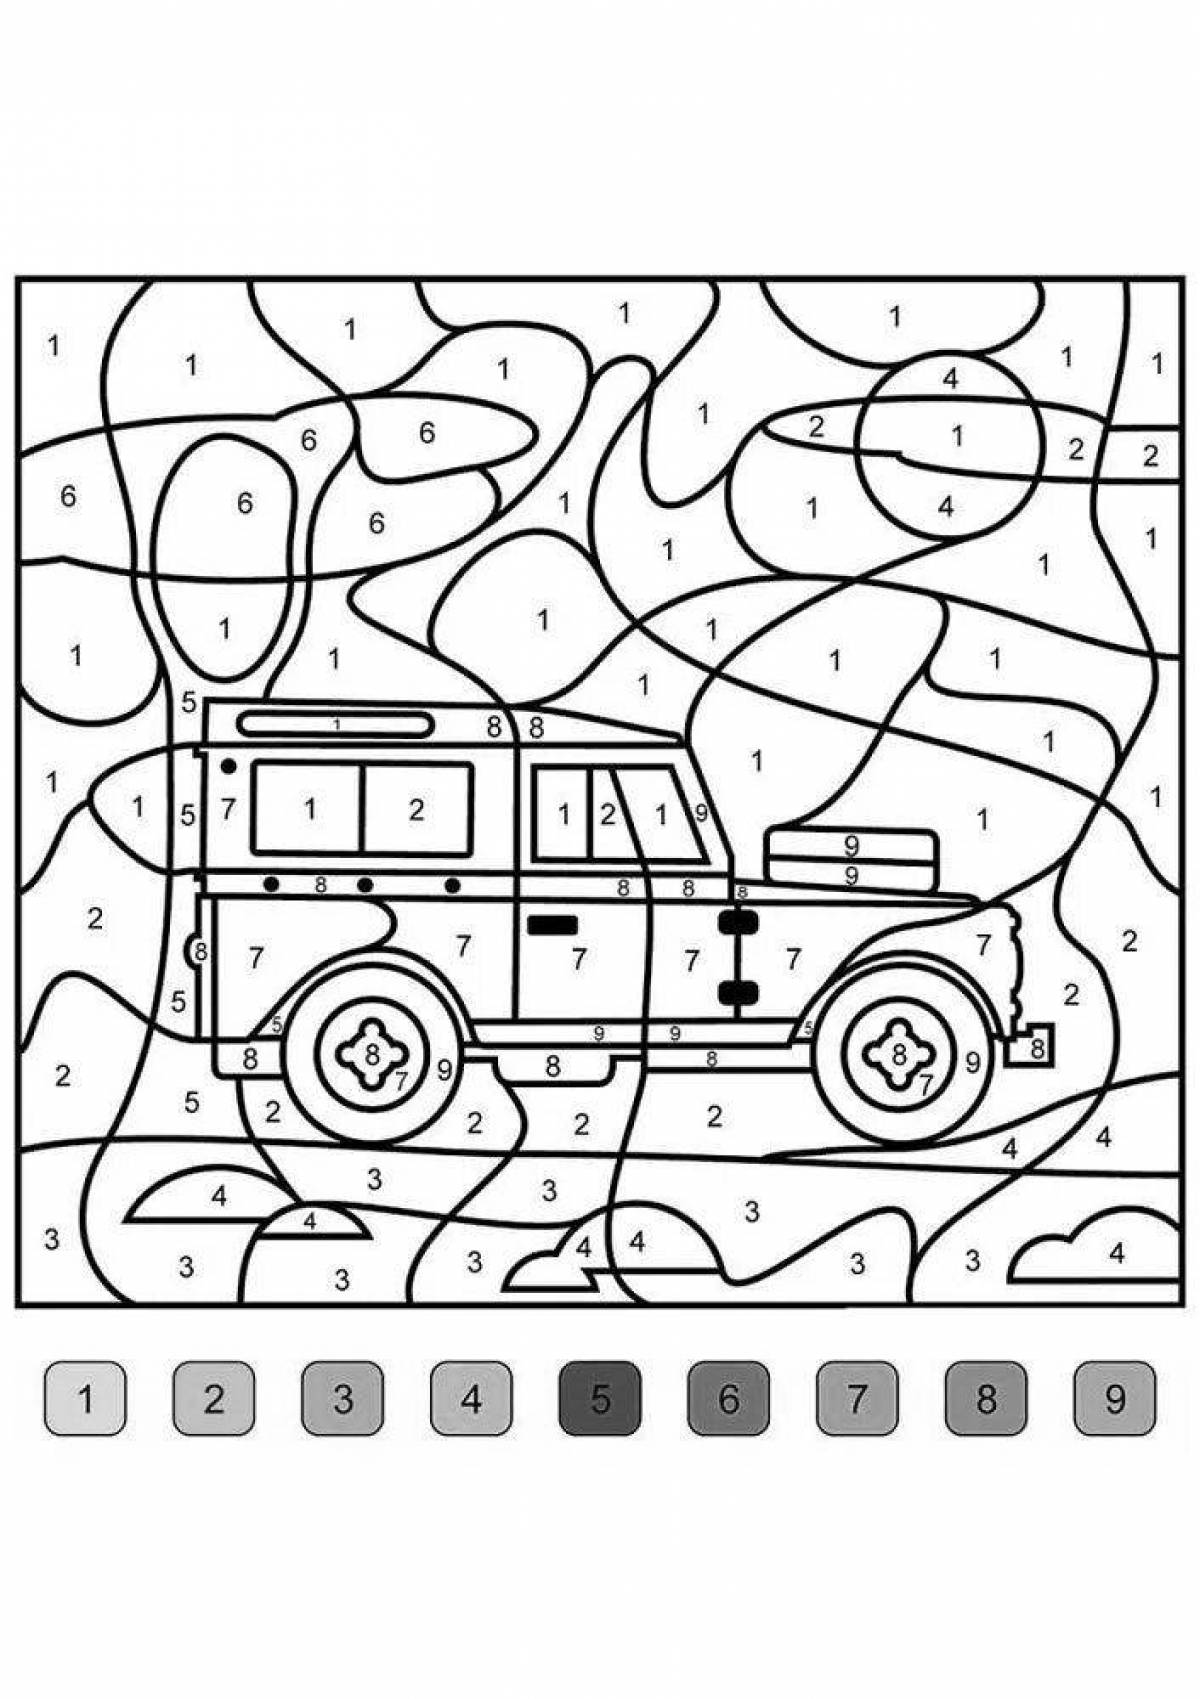 Fun coloring book for boys 6-7 years old